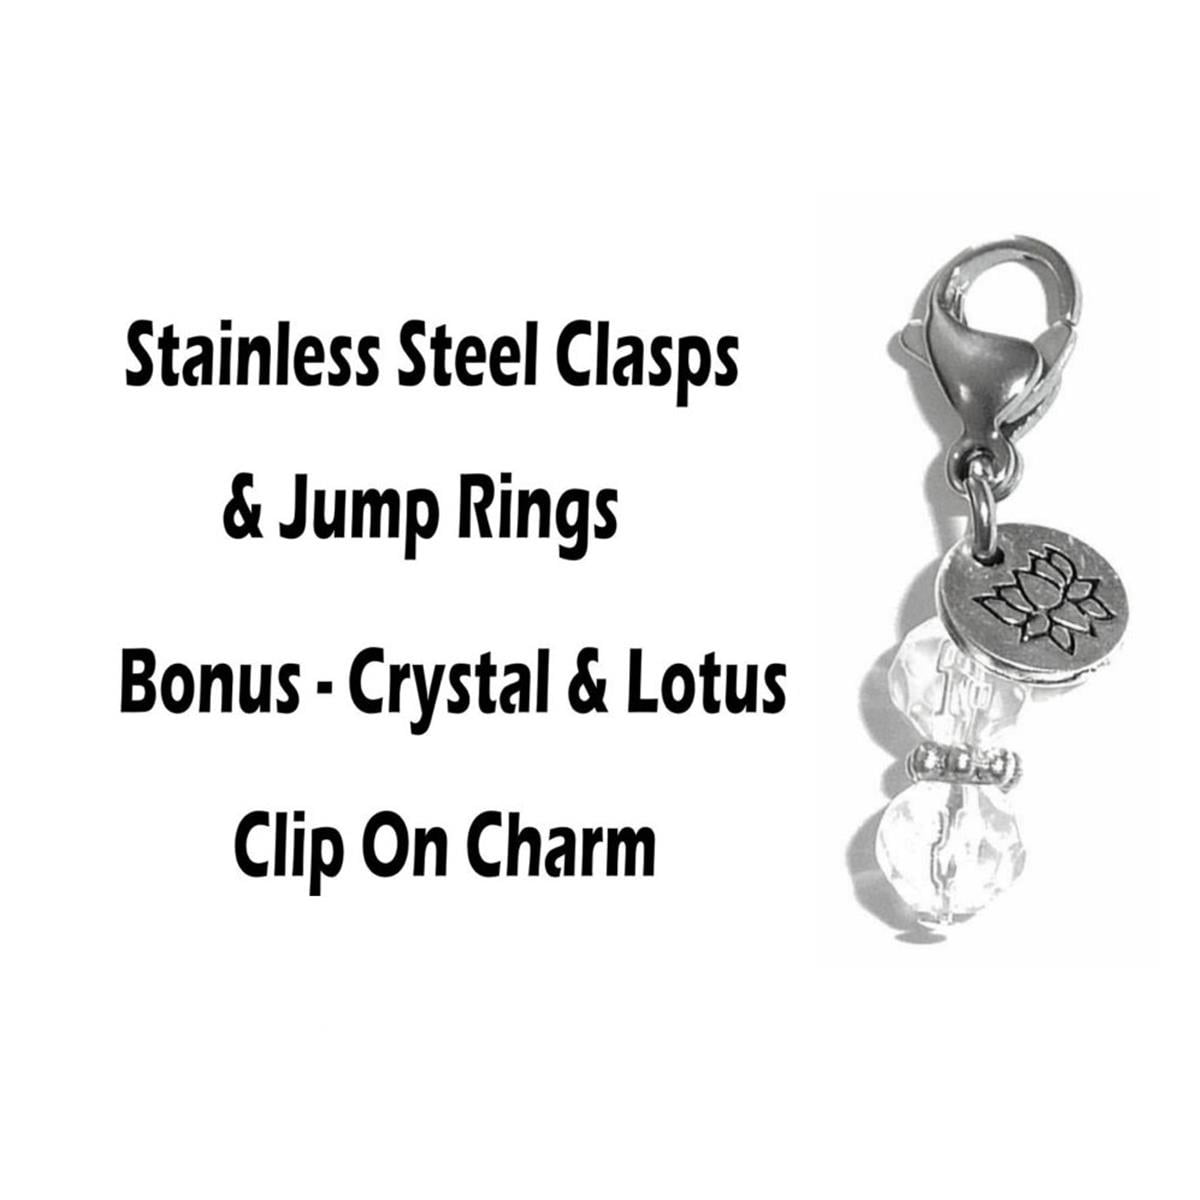 Animal Charms Clip On To Anything – Perfect For Charm Bracelets And  Necklaces, Bag Or Purse Charms, Backpacks, Zipper Pulls - Dog Charm 